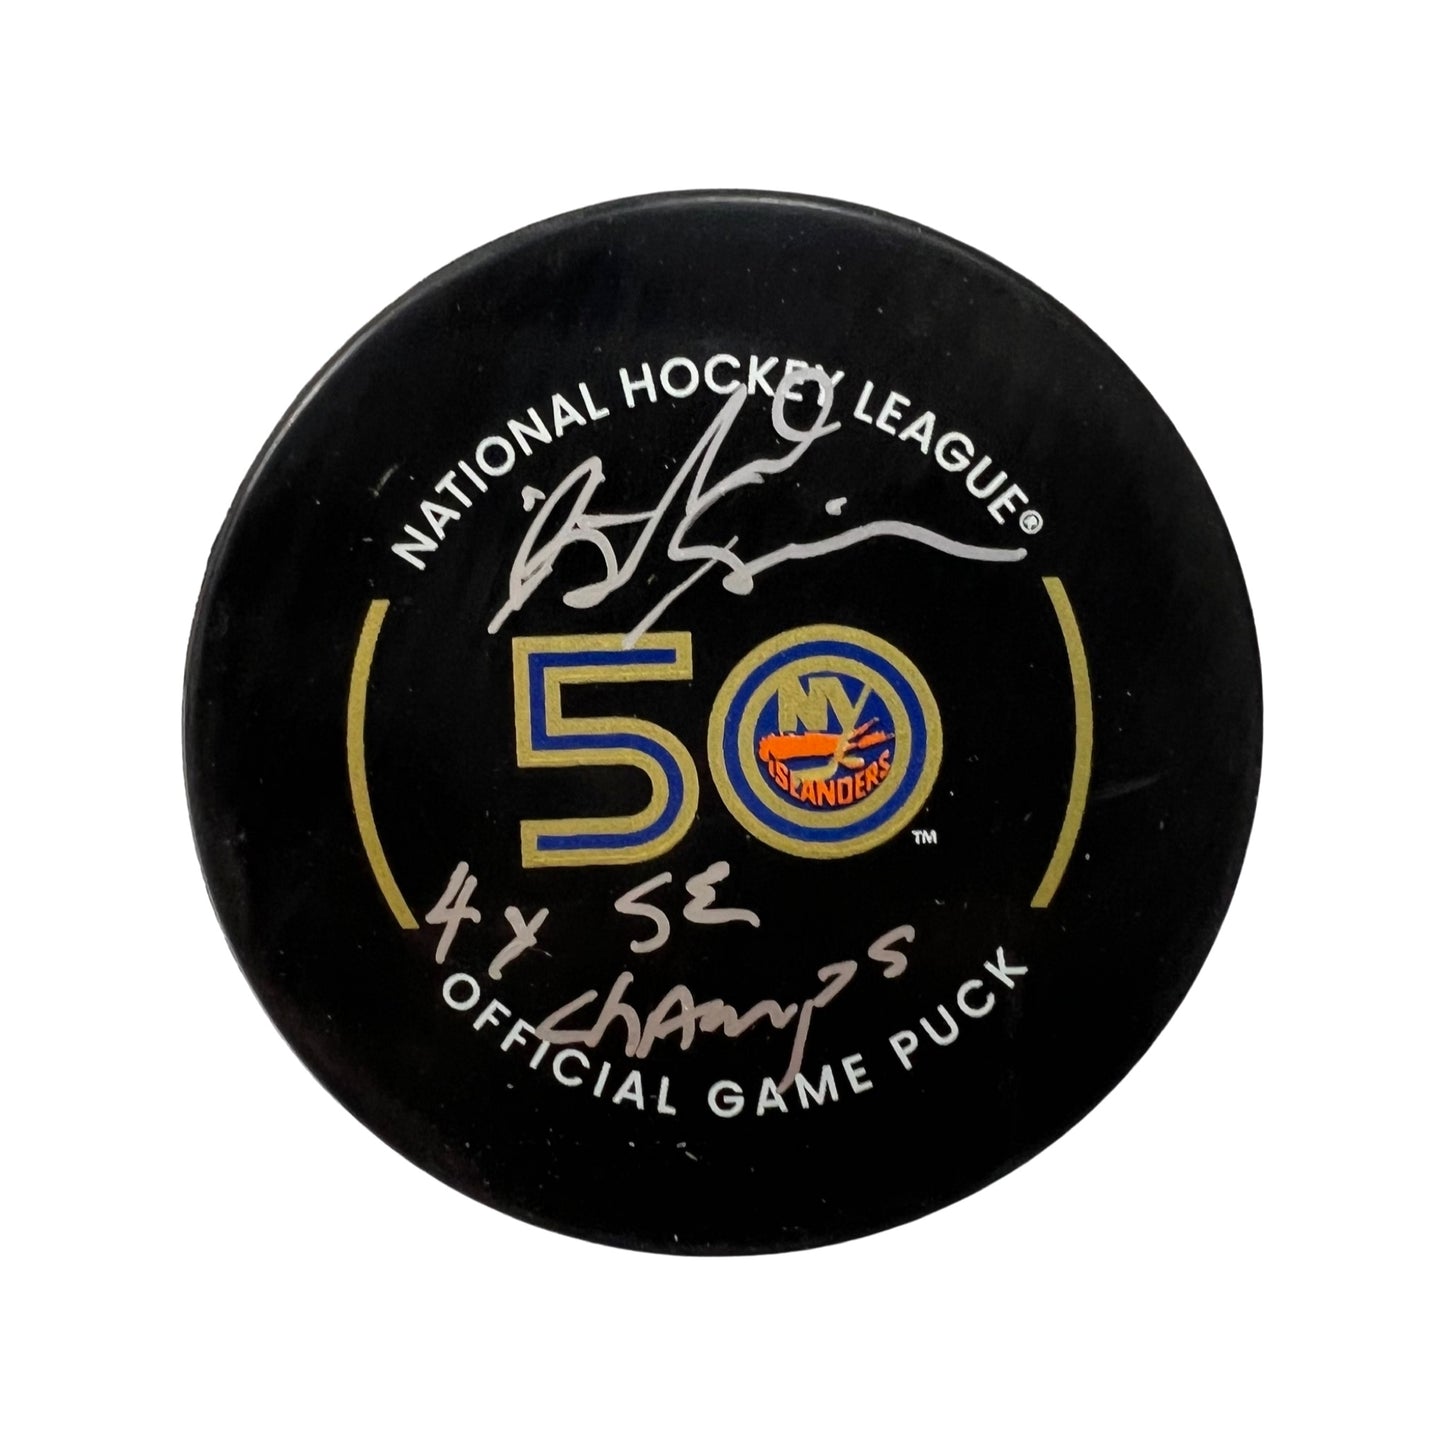 Butch Goring Autographed New York Islanders Official Game Puck “4x SC Champs” Inscription Steiner CX